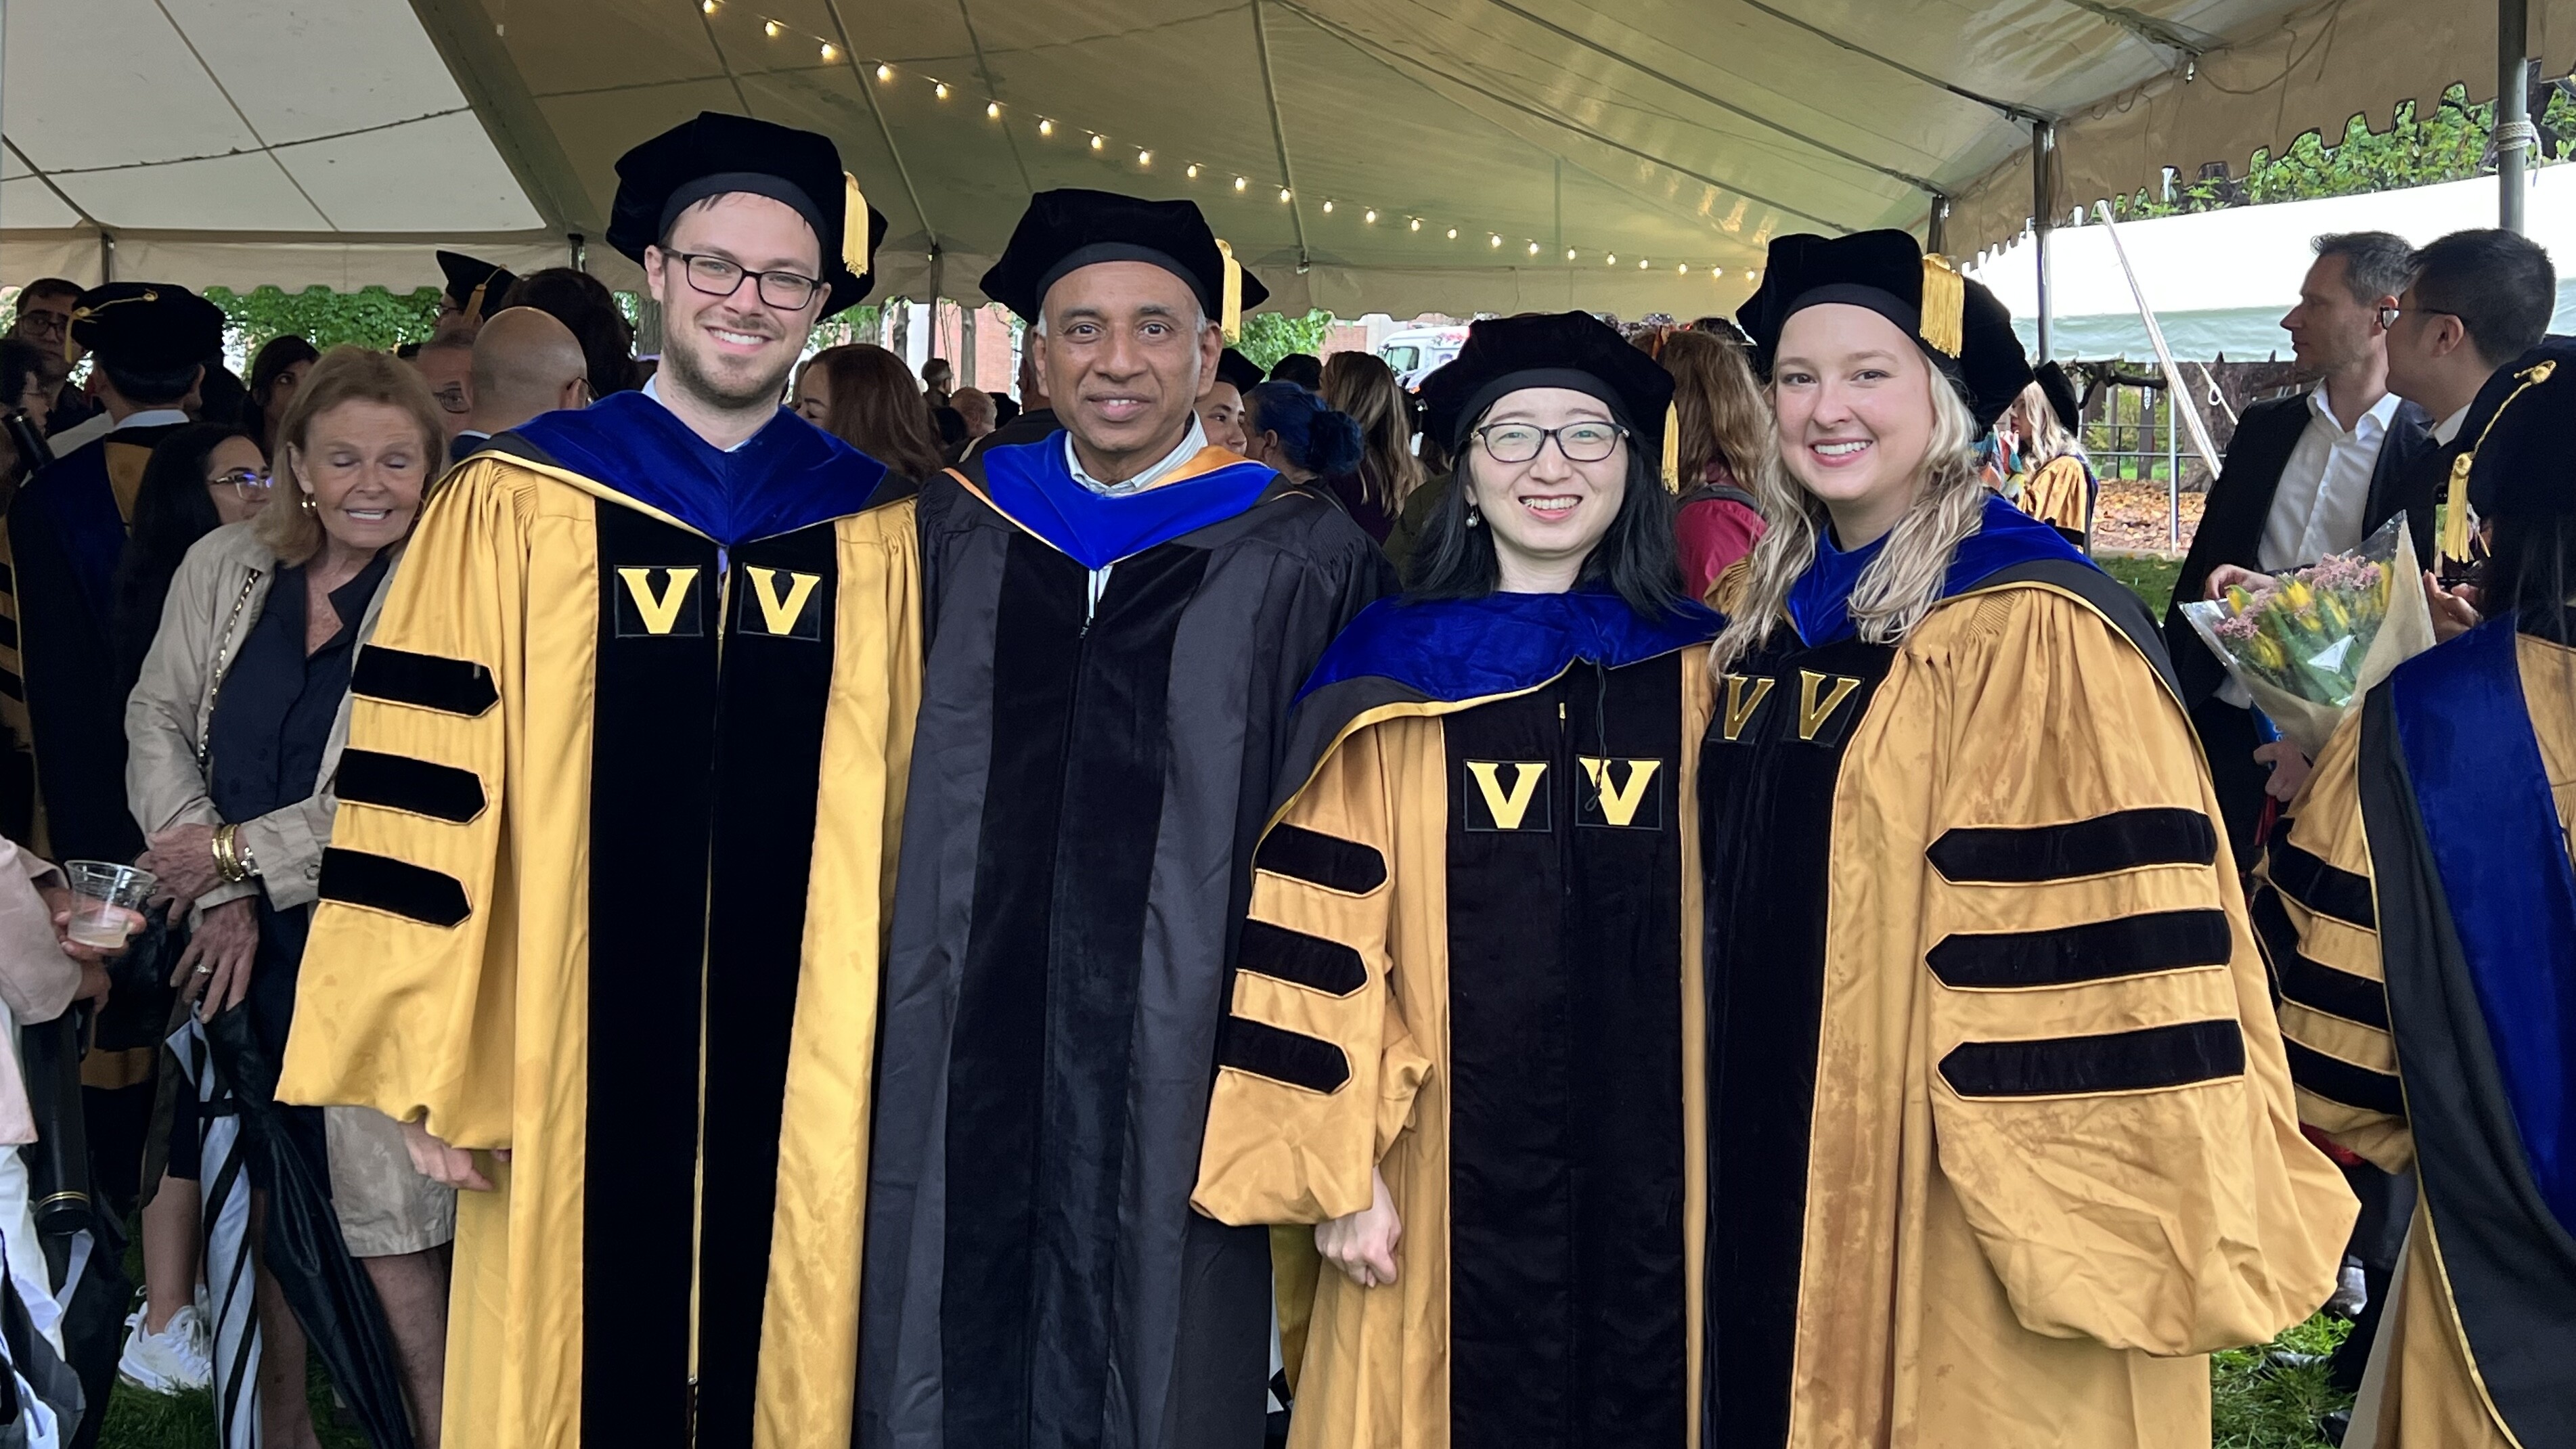 Congratulations, Dr. Sisson, Dr. Kong, and Dr. Miele!